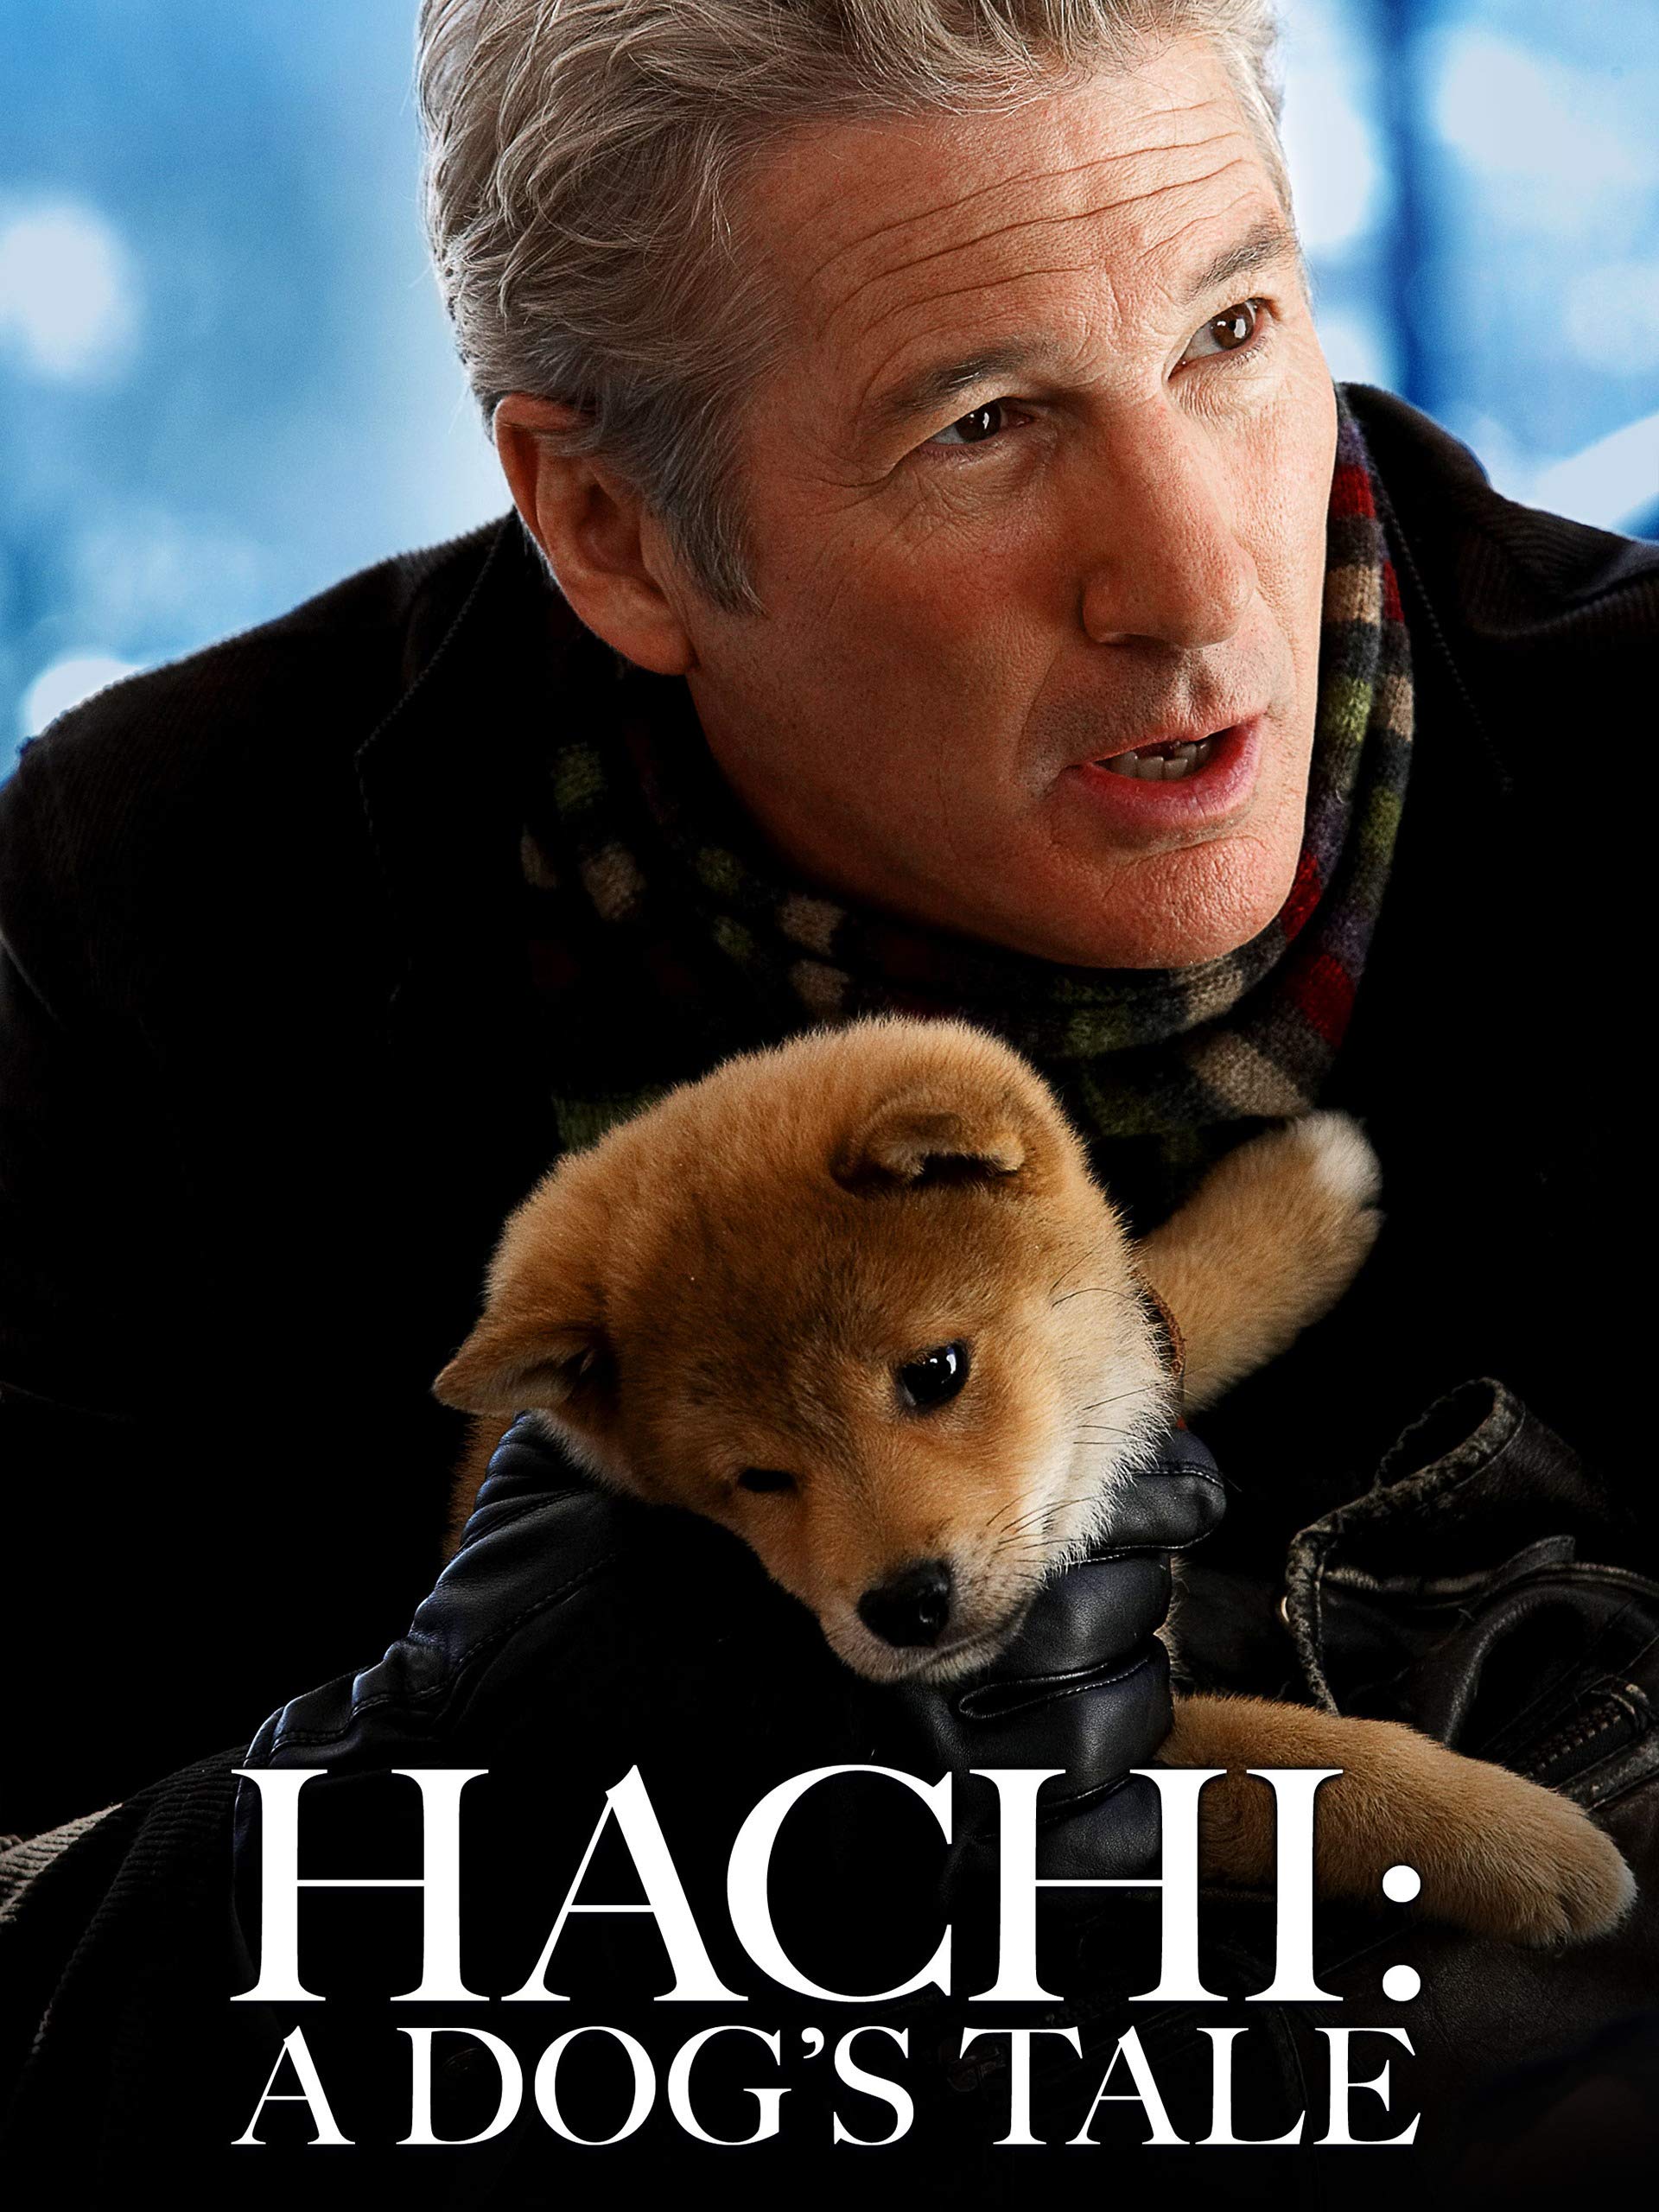 Film Hachi: A Dog's Tale about history of Hachiko